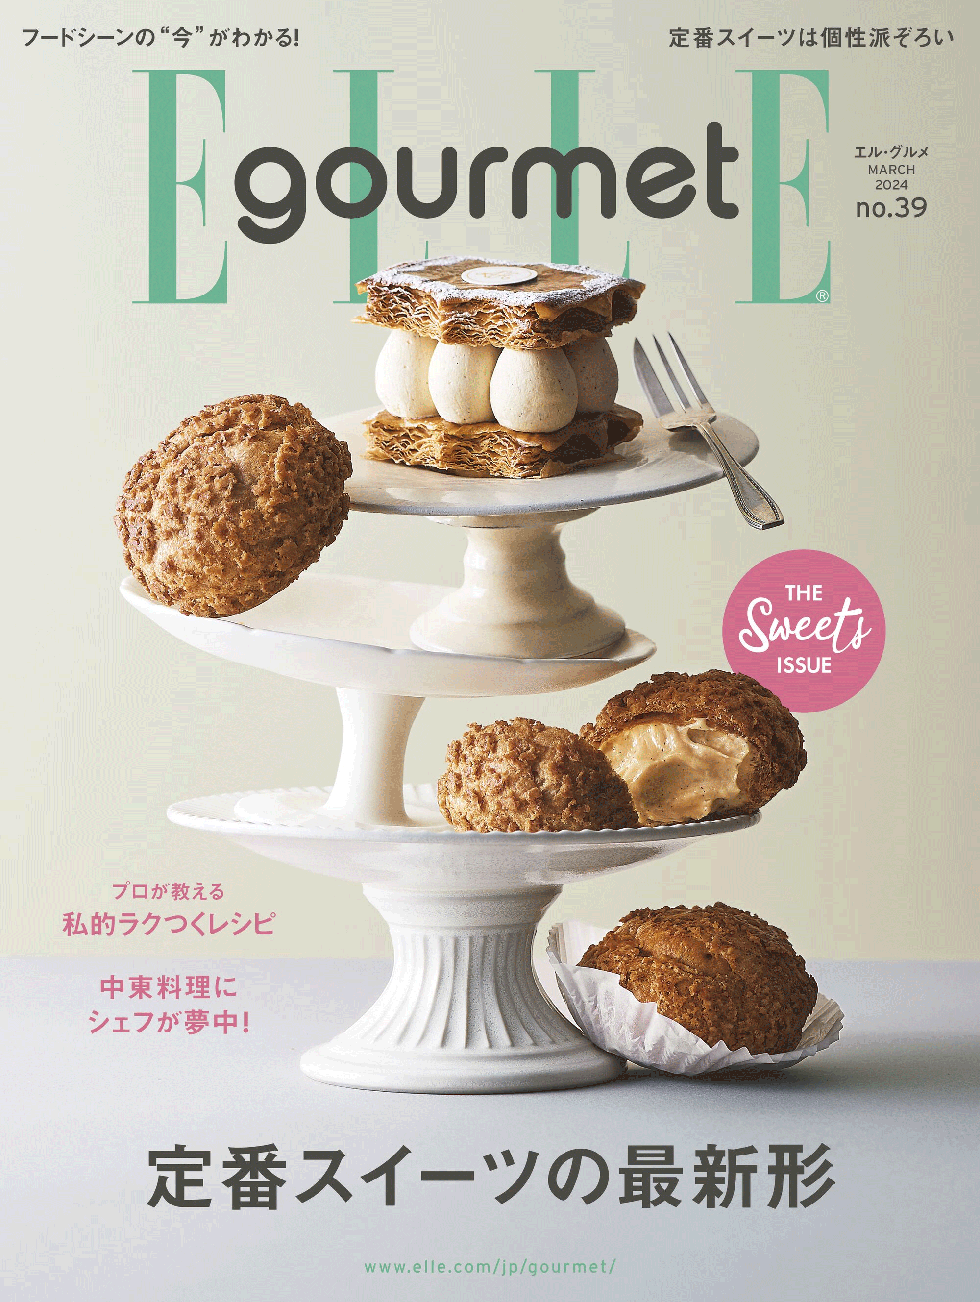 a magazine cover with a plate of desserts